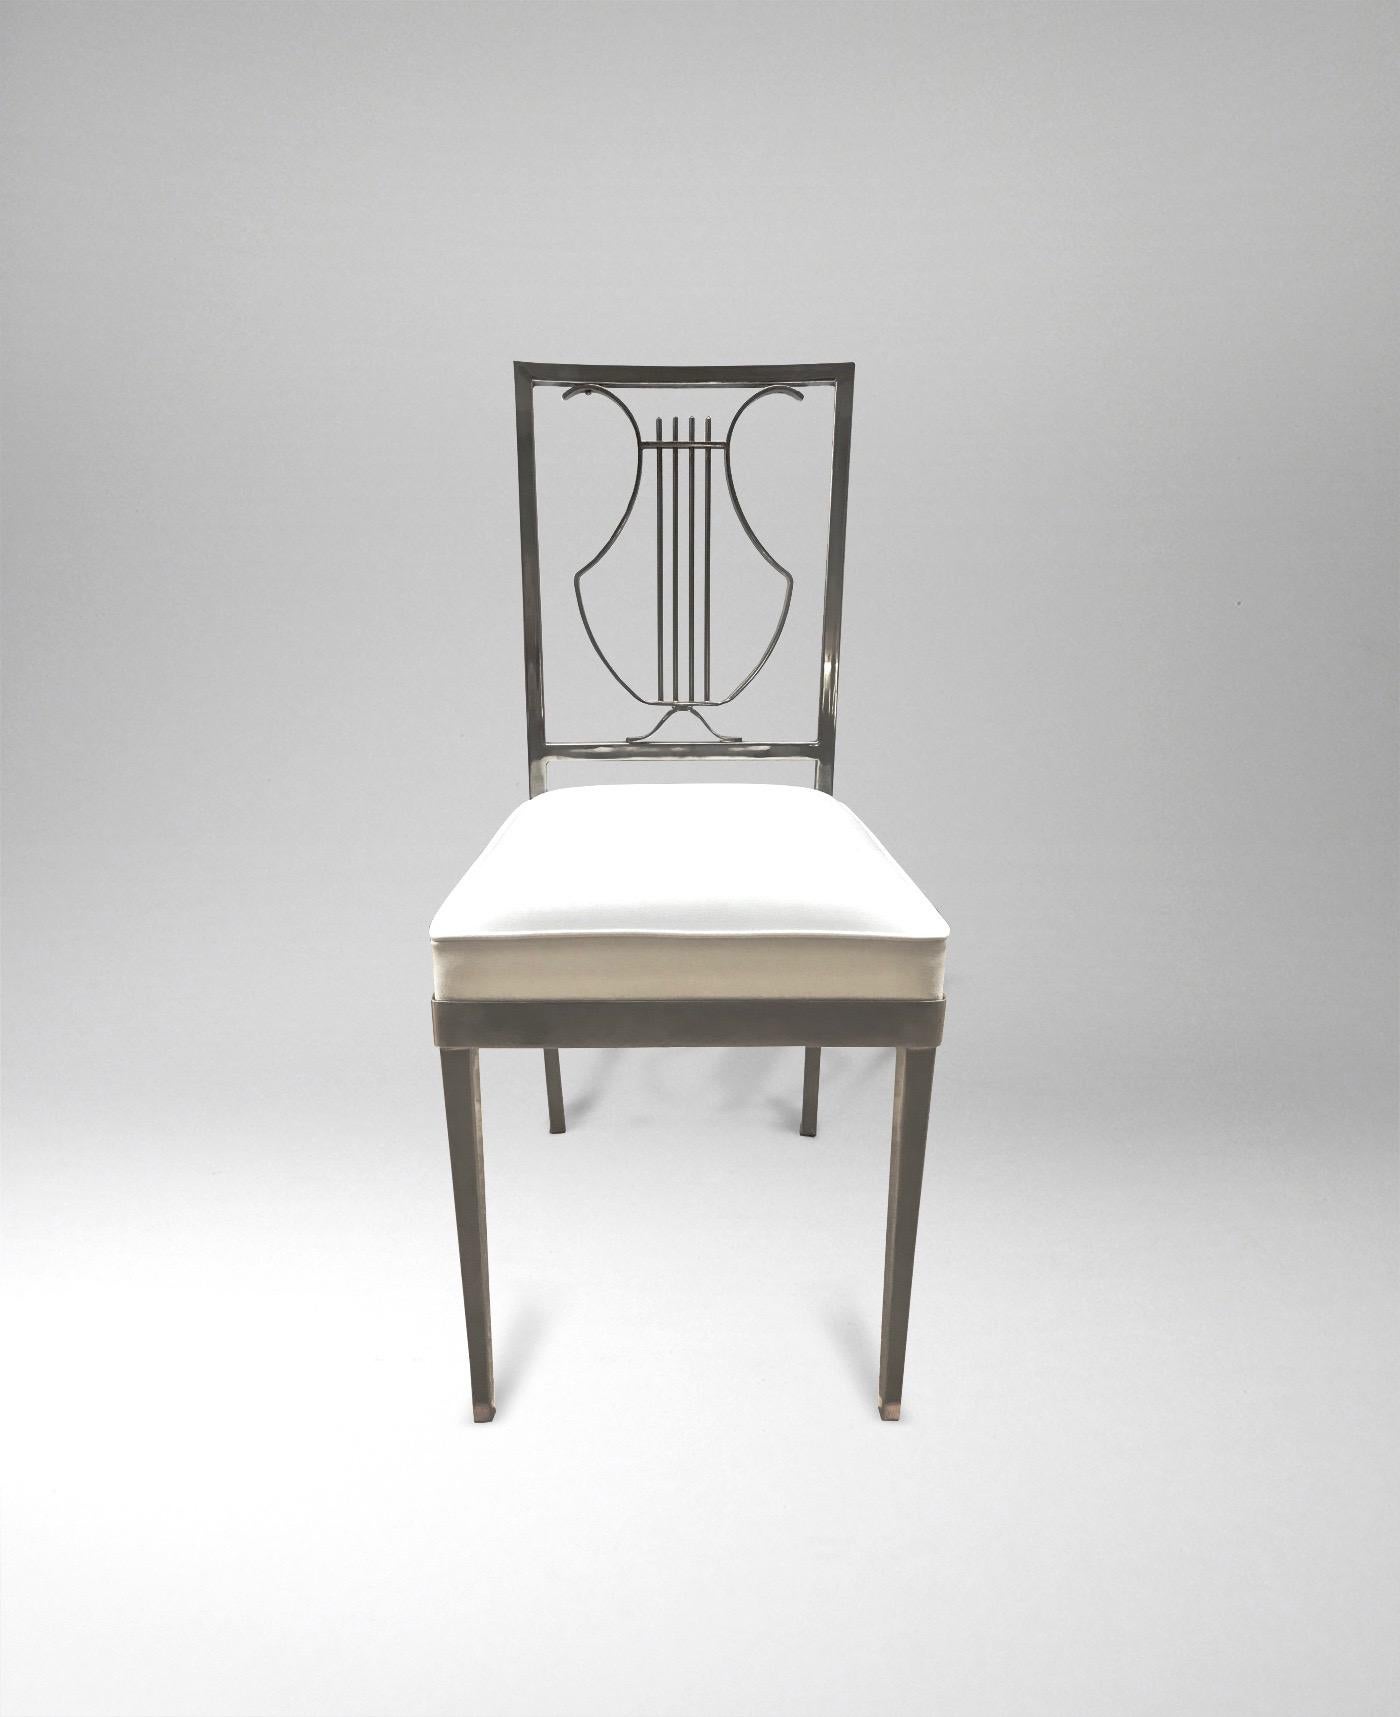 French, 1970s
Each in brushed metal finish, with stylized 'lyre' backrest
Seats re-upholstered in white faux leather.